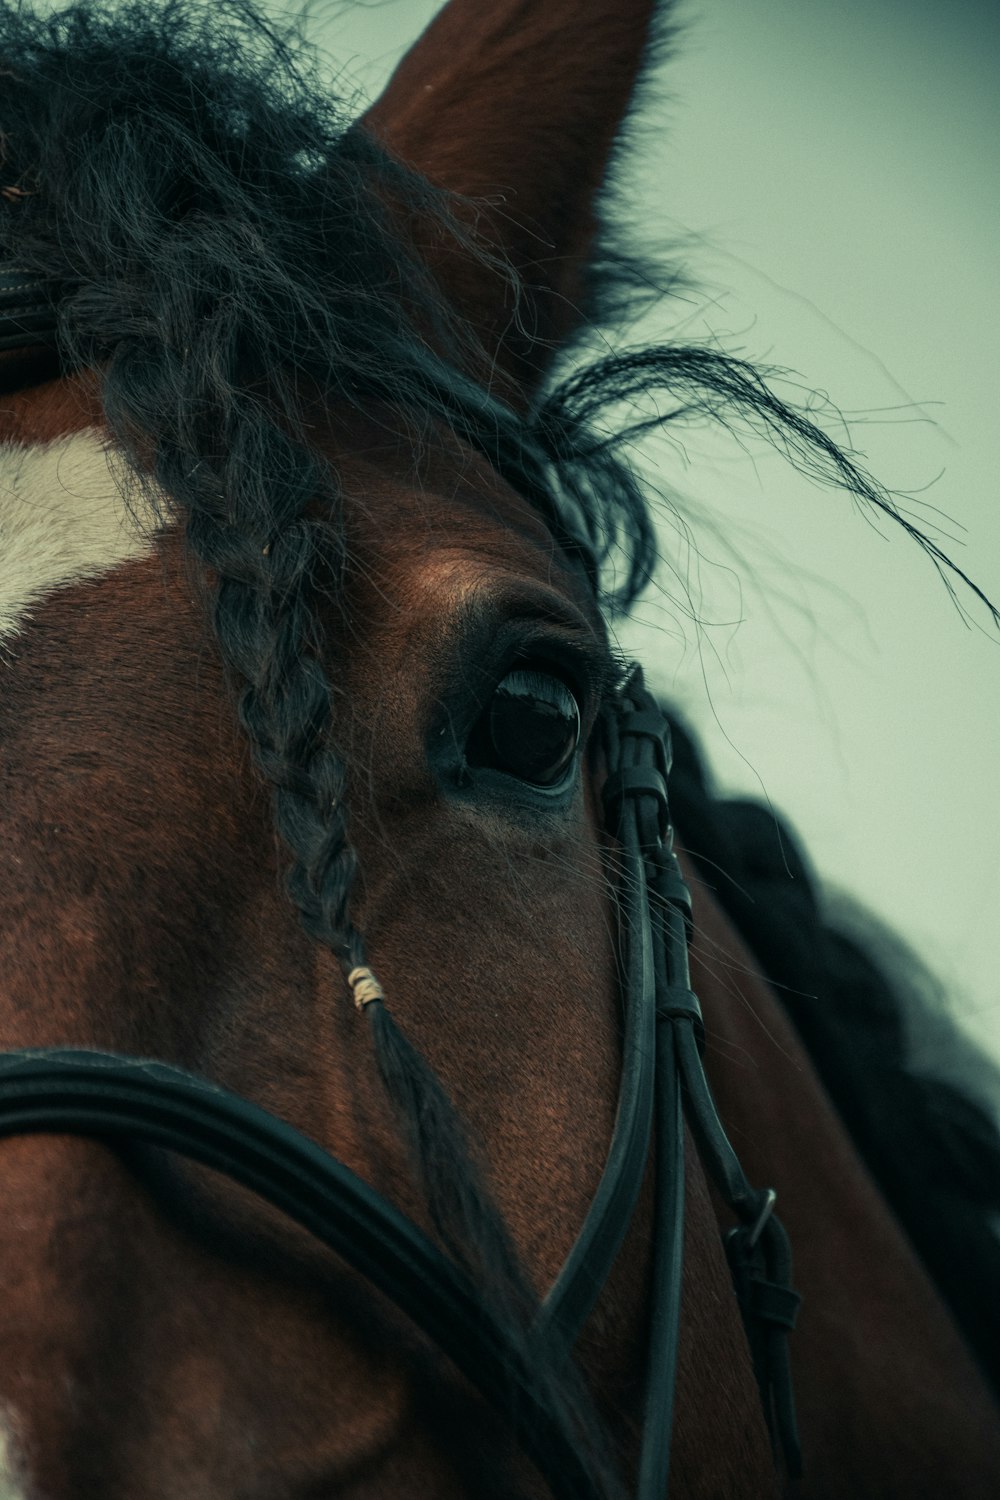 a close up of a horse's face and mane